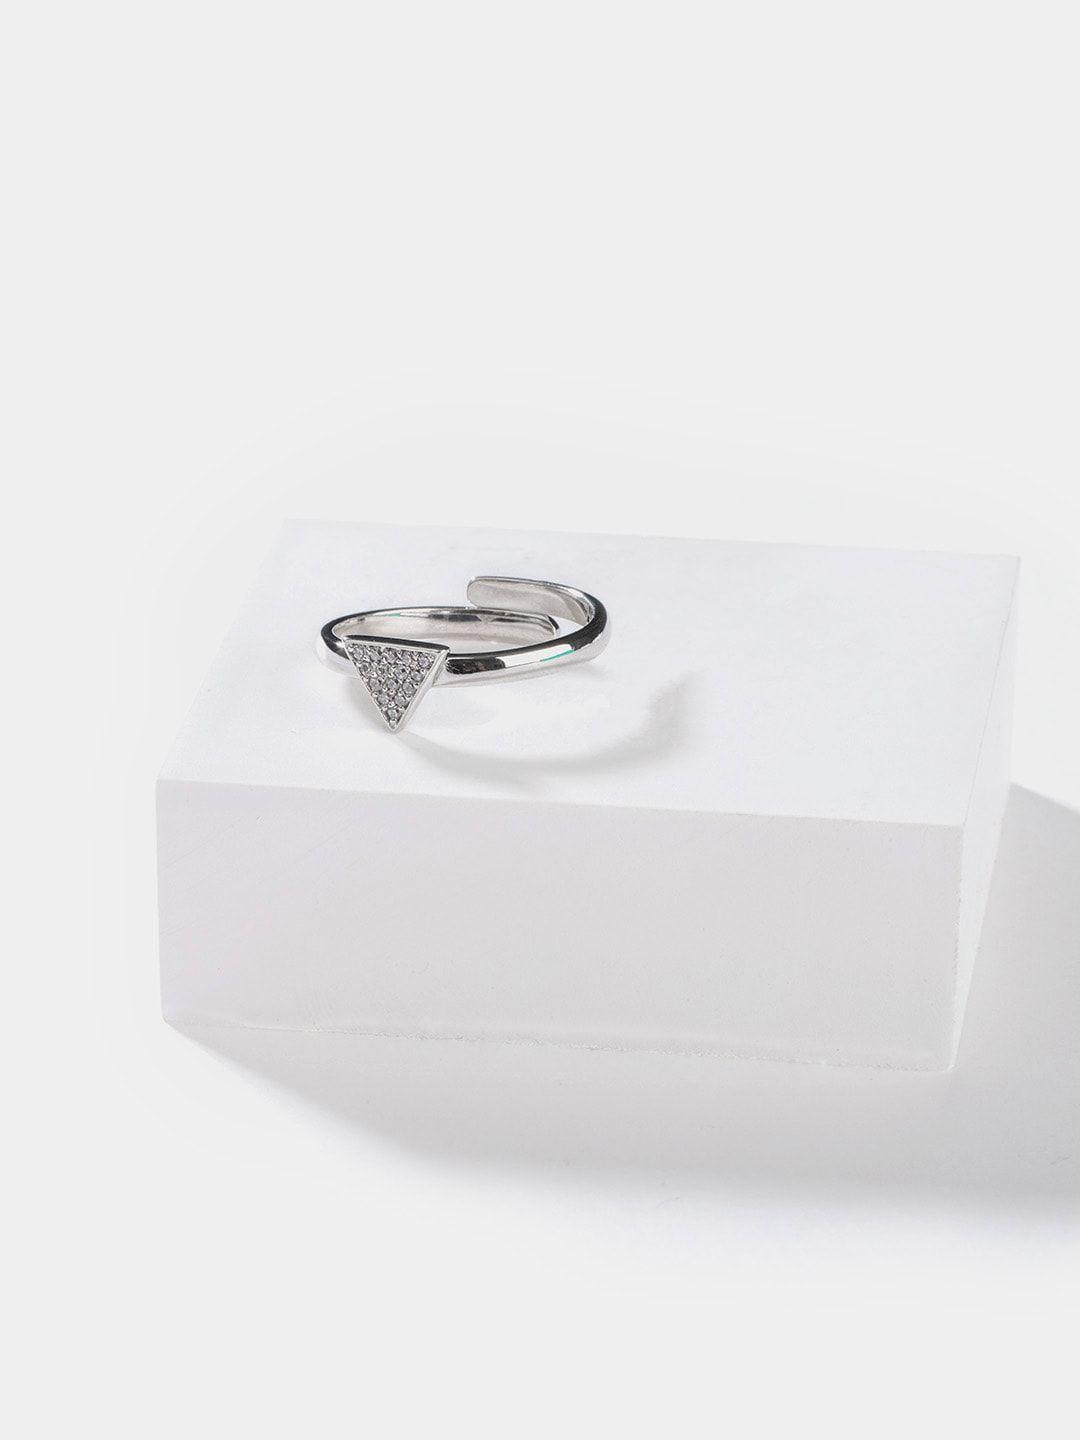 shaya 925 sterling silver triangle cz adjustable ring